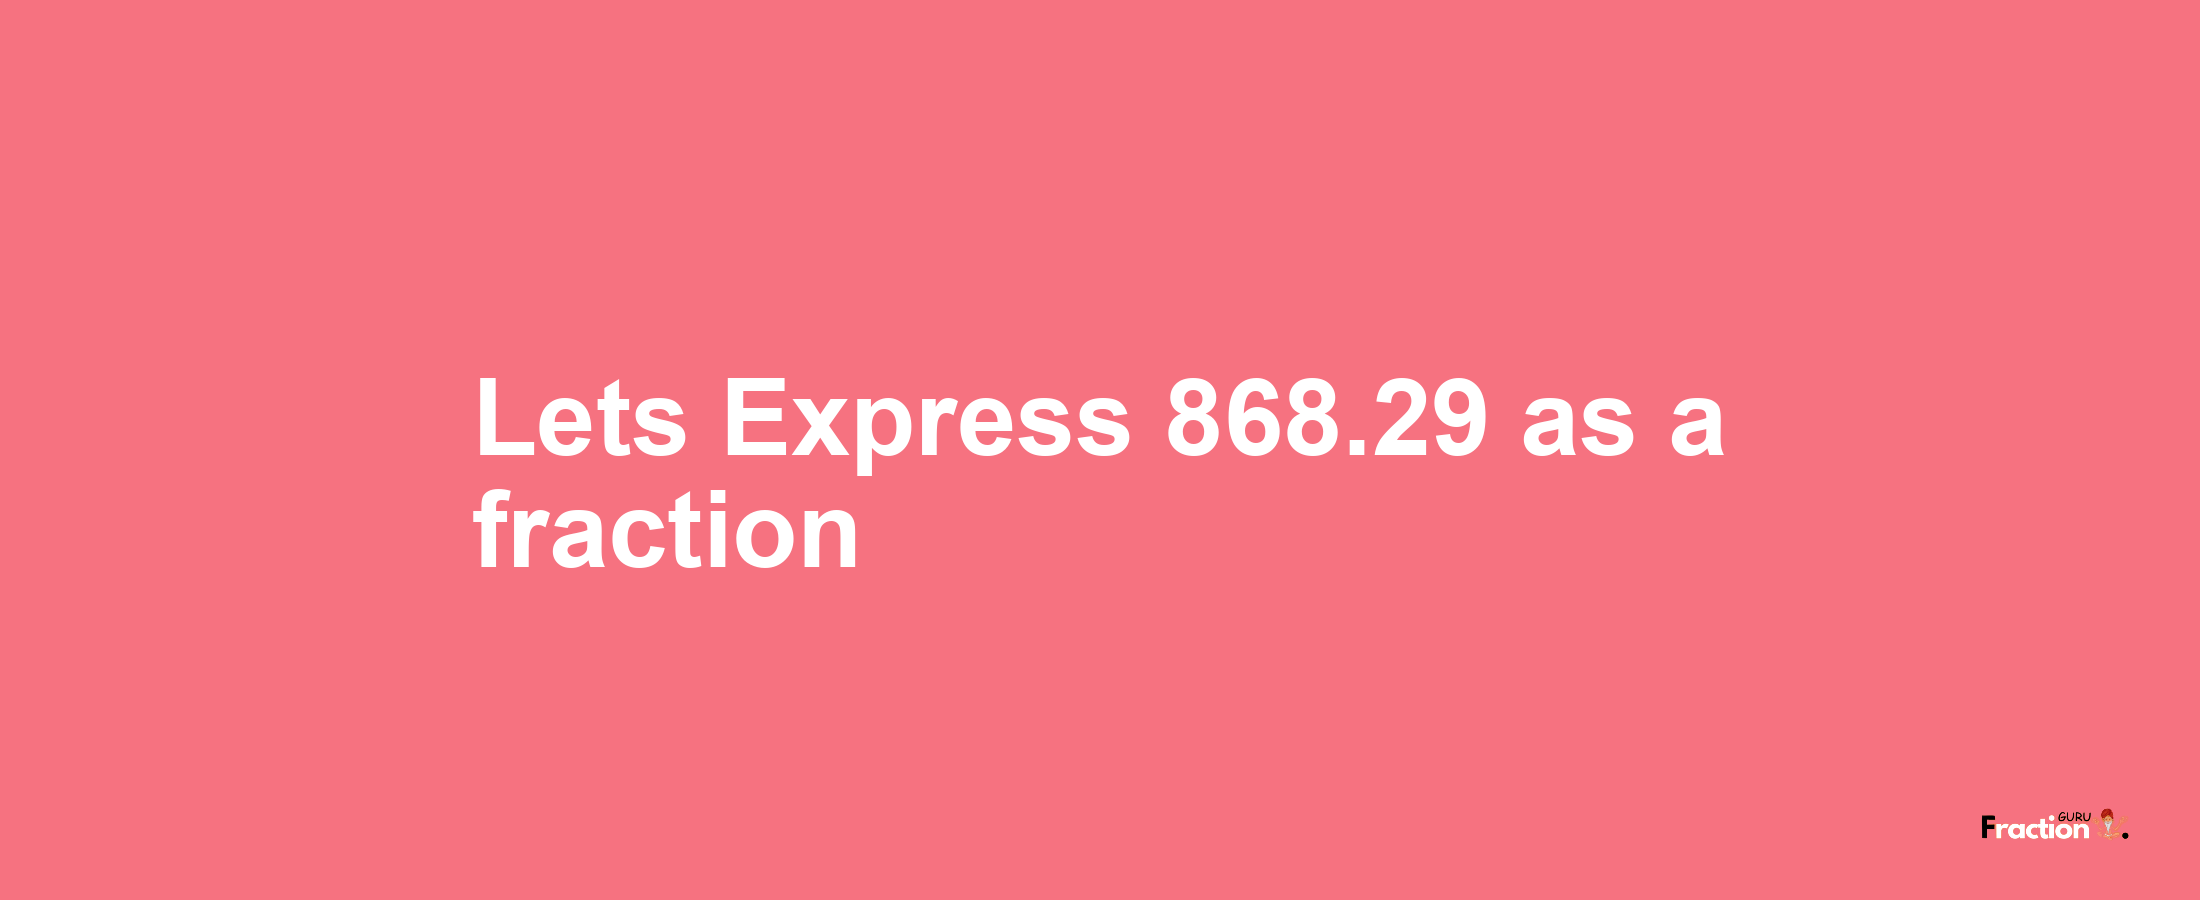 Lets Express 868.29 as afraction